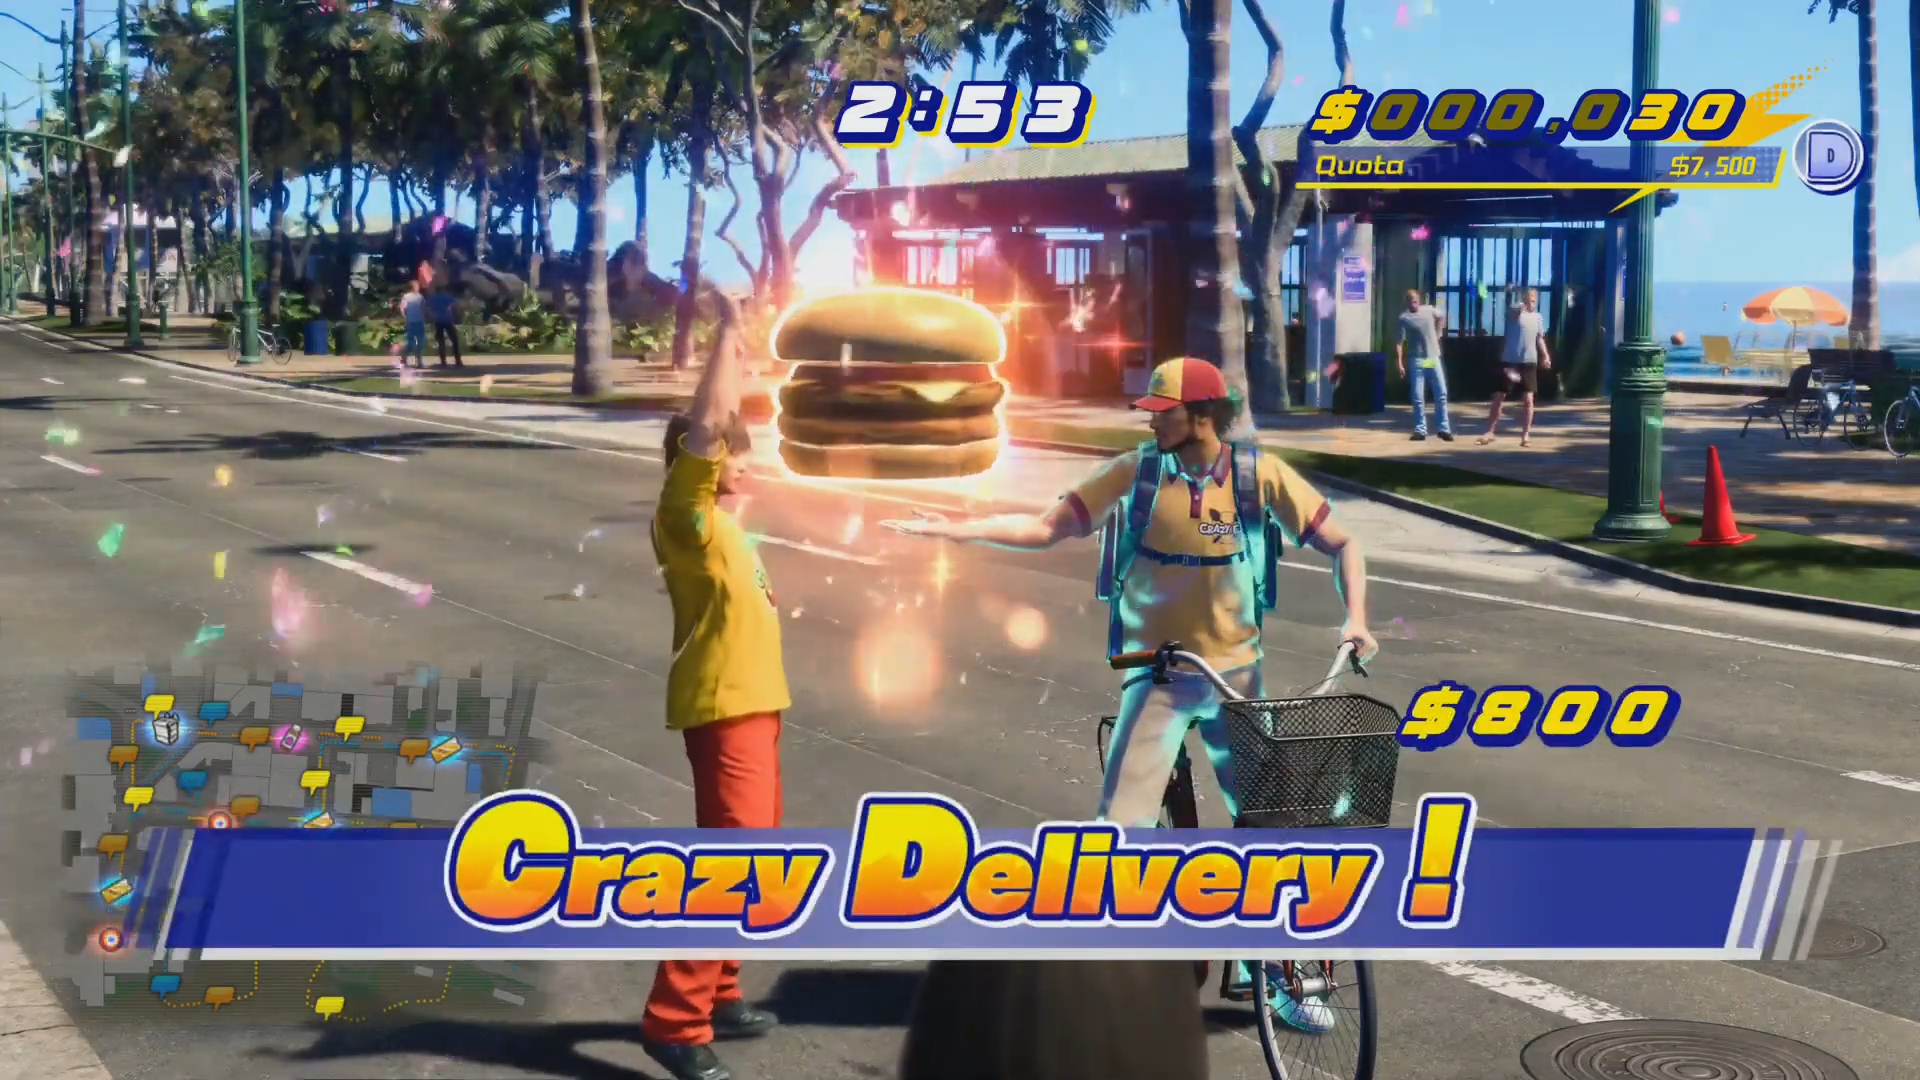 Ichiban delivering a giant hamburger in Like a Dragon: Infinite Wealth.